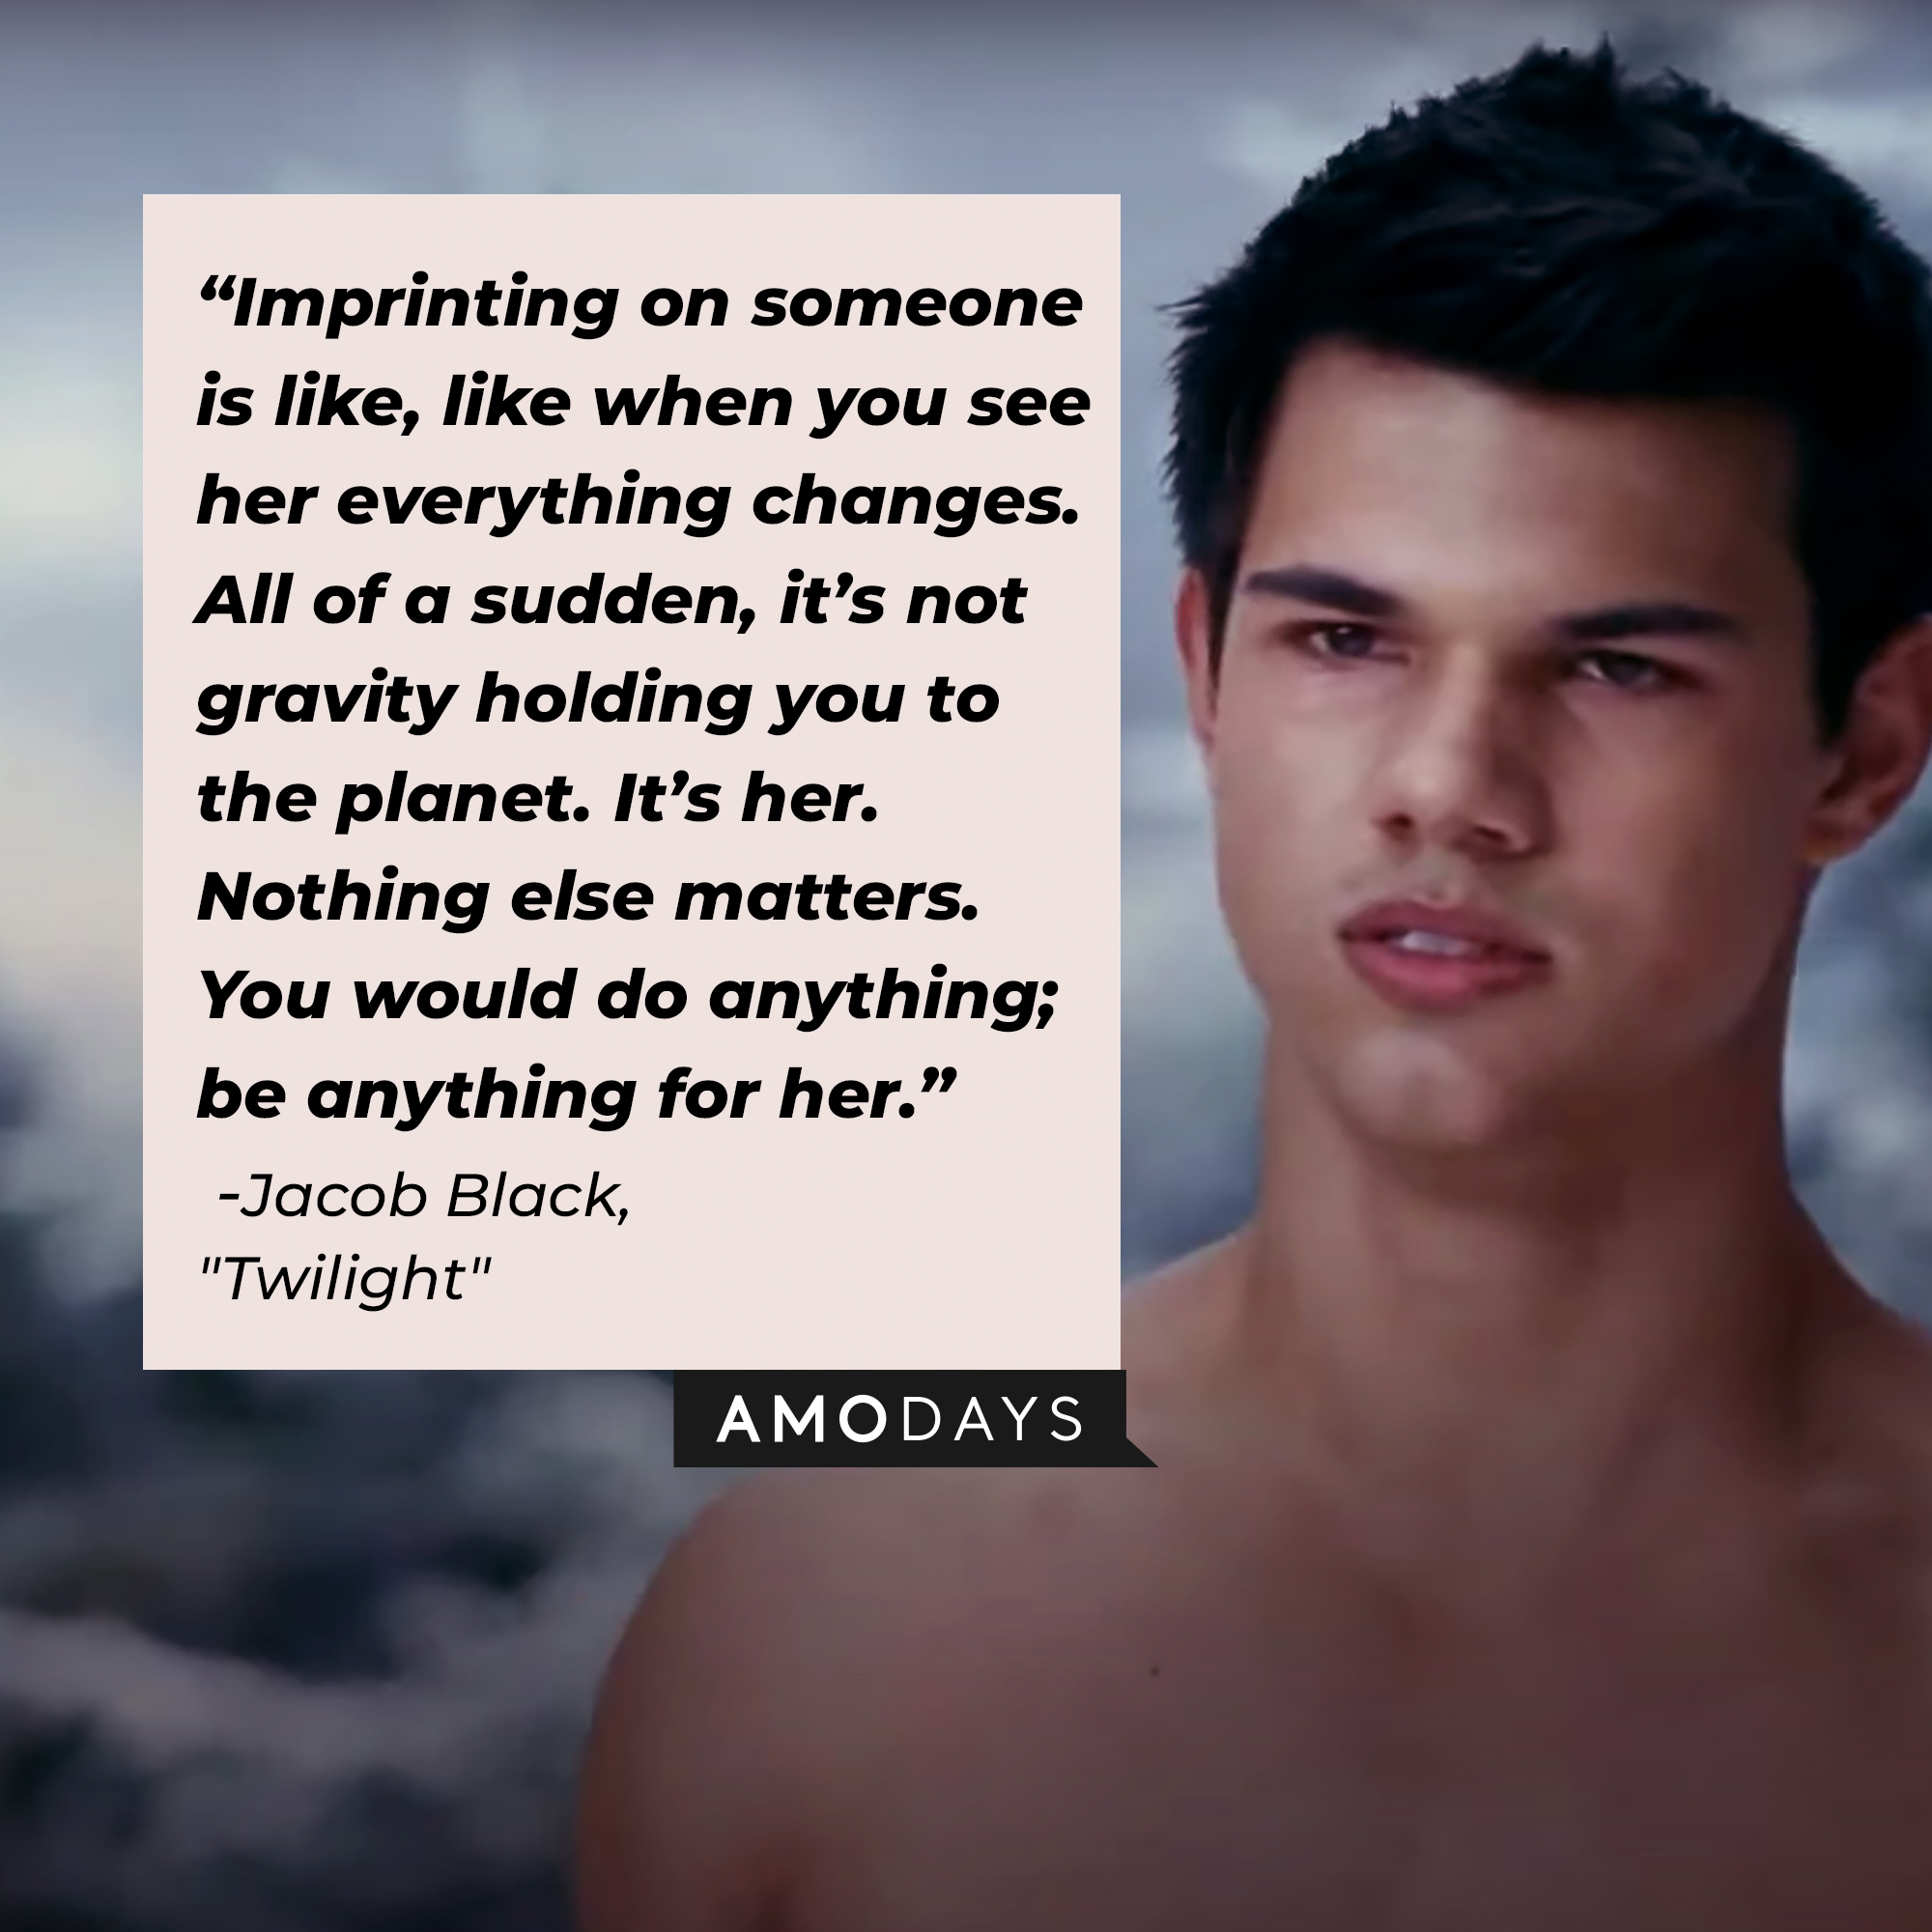 Jacob Black with his quote: “Imprinting on someone is like, like when you see her everything changes. All of a sudden, it’s not gravity holding you to the planet. It’s her. Nothing else matters. You would do anything; be anything for her.” | Source: Facebook.com/twilight